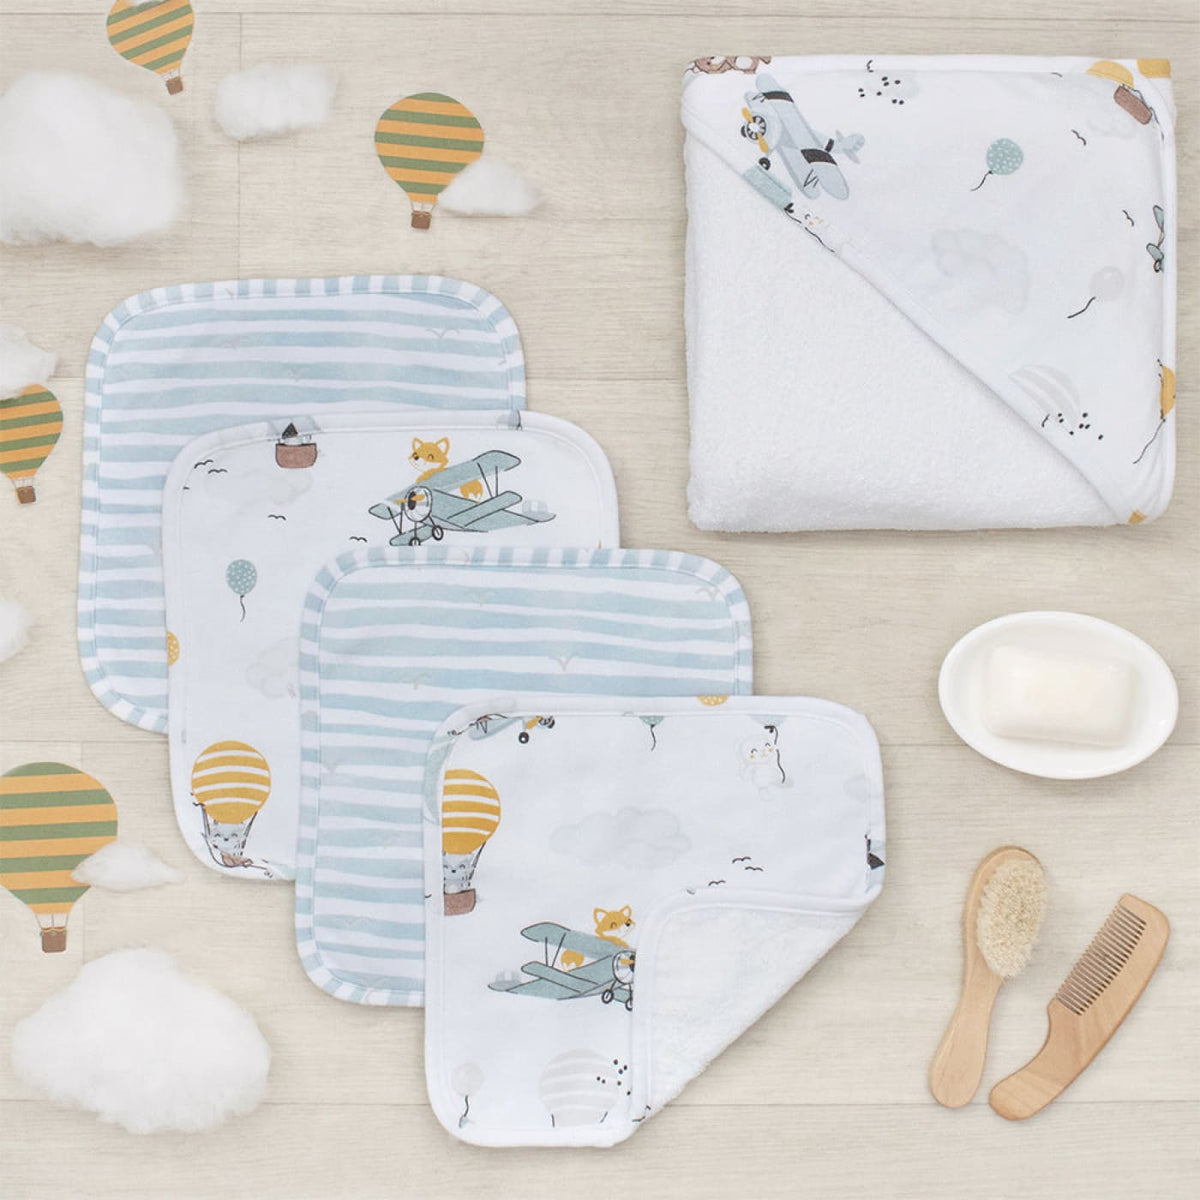 Living Textiles 5pc Bath Gift Set - Up Up &amp; Away - Up Up and Away - BATHTIME &amp; CHANGING - TOWELS/WASHERS